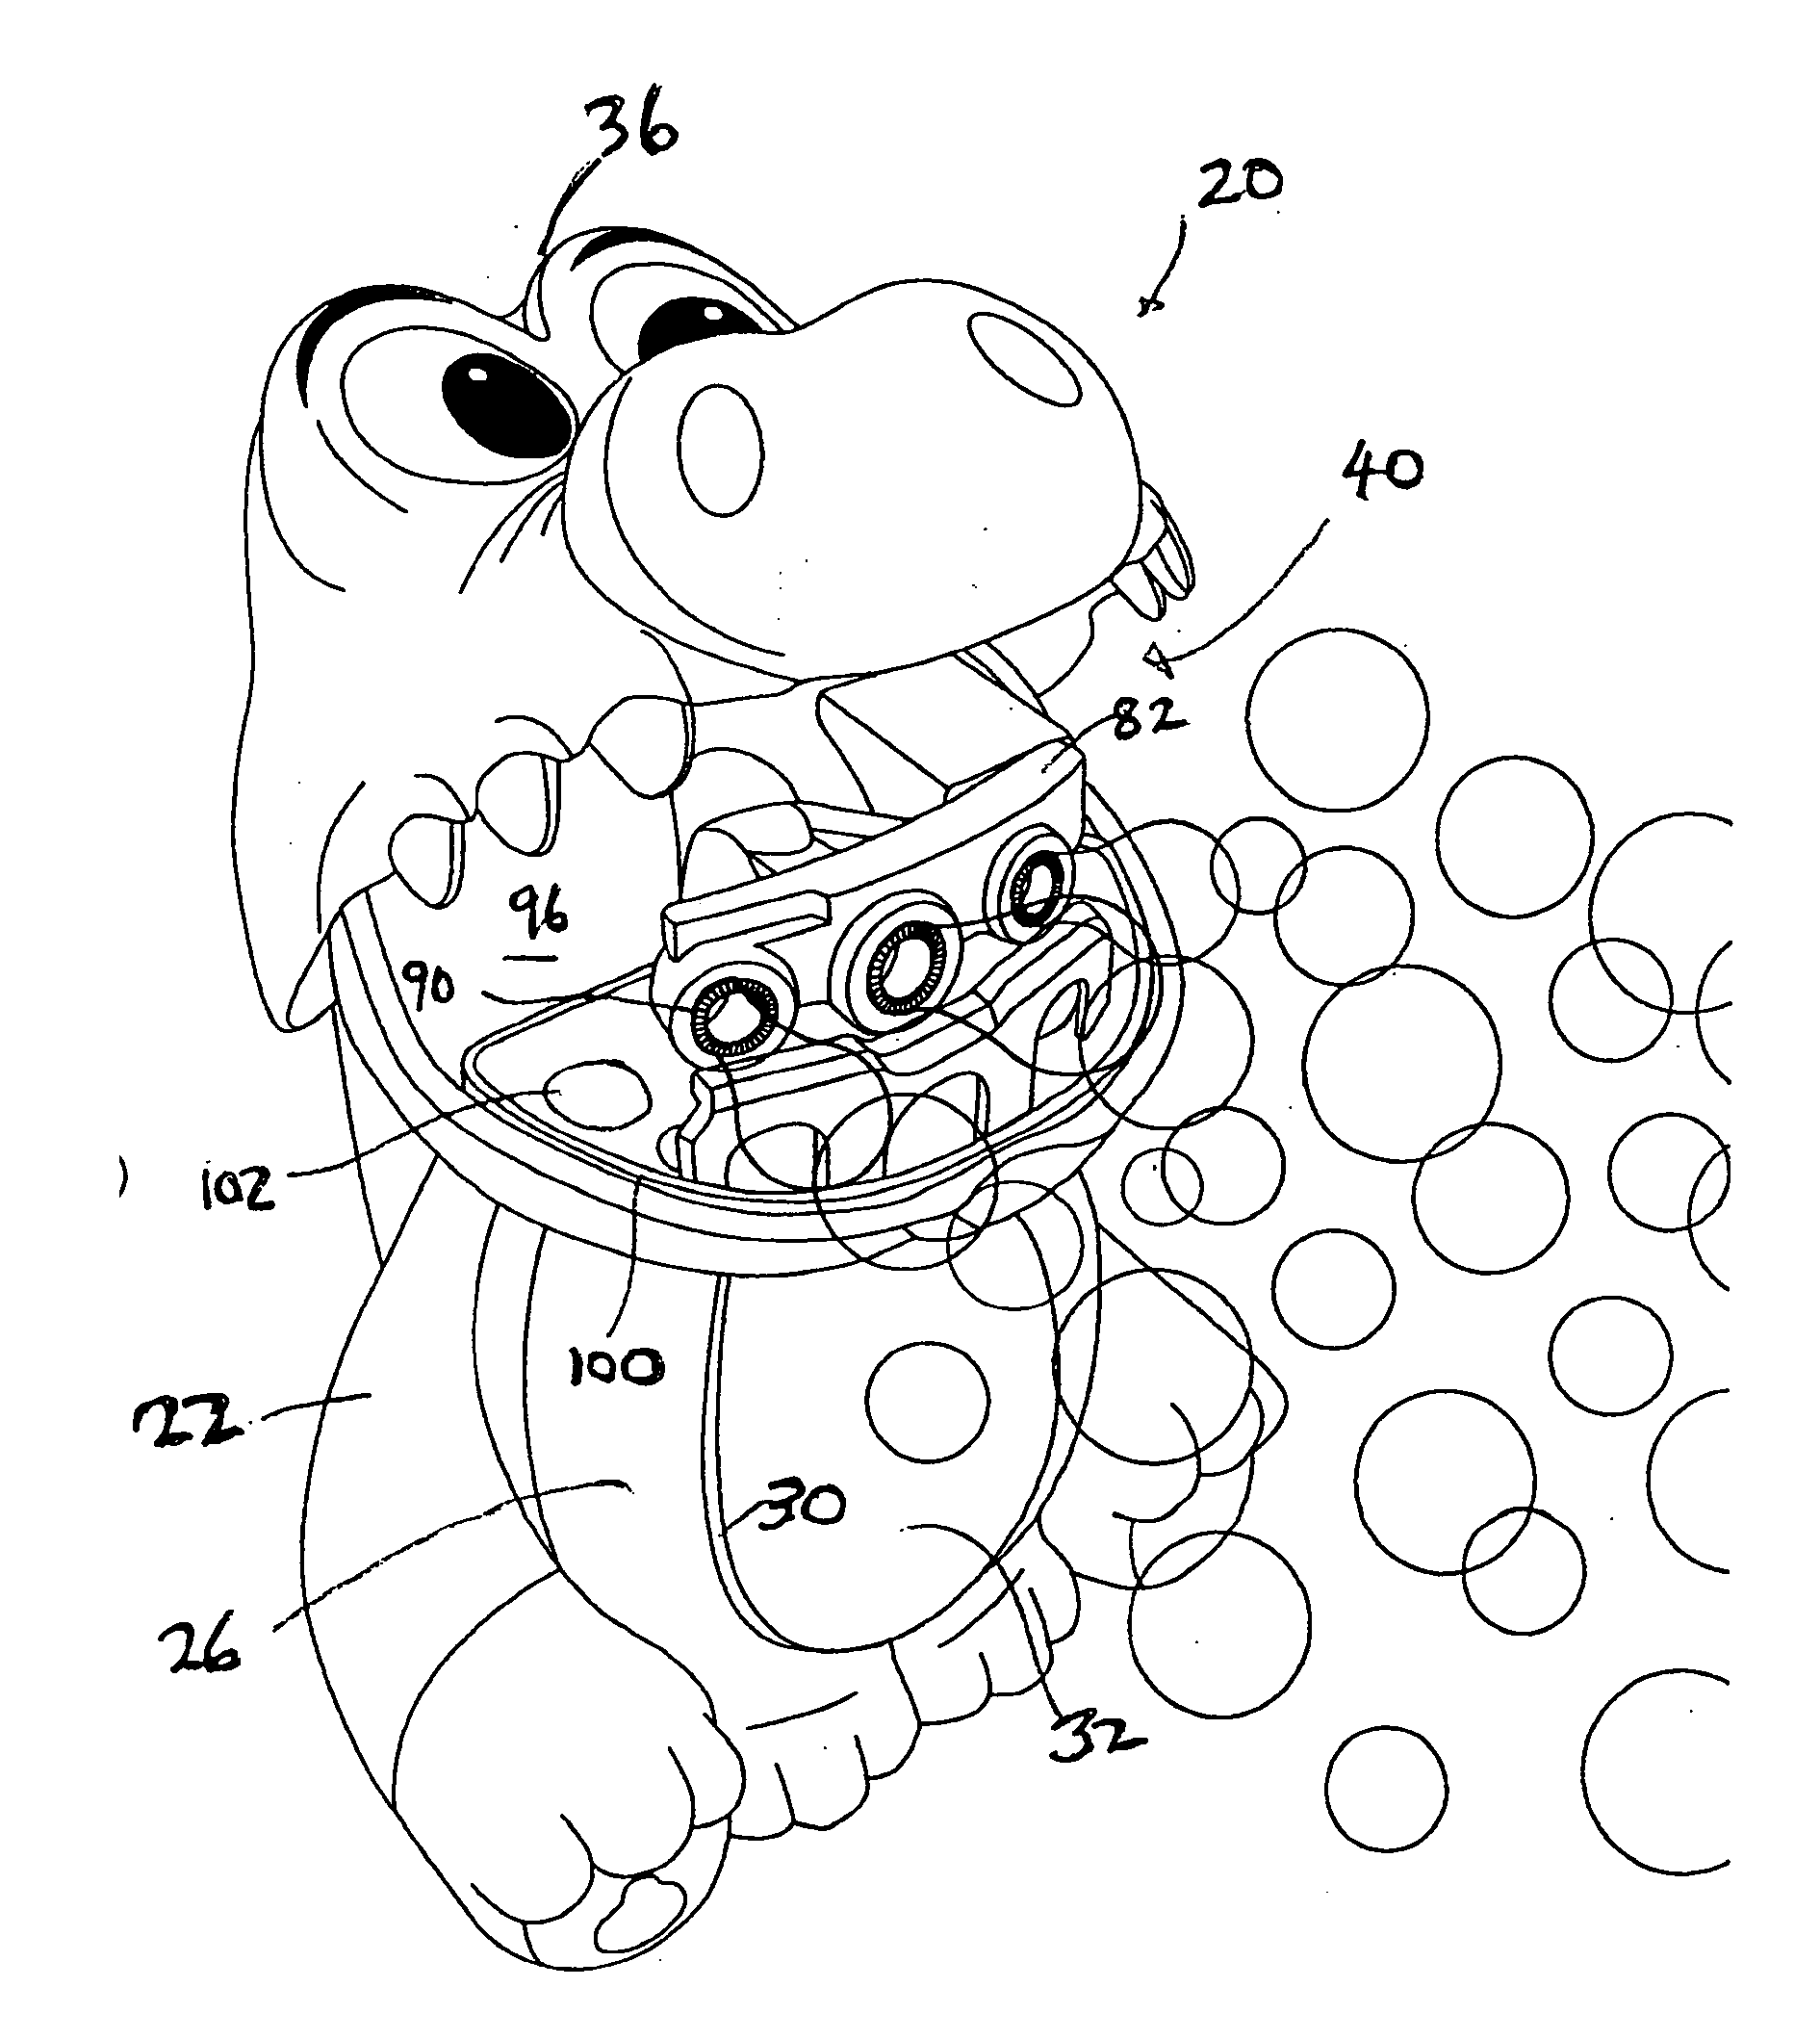 Bubble generating assembly